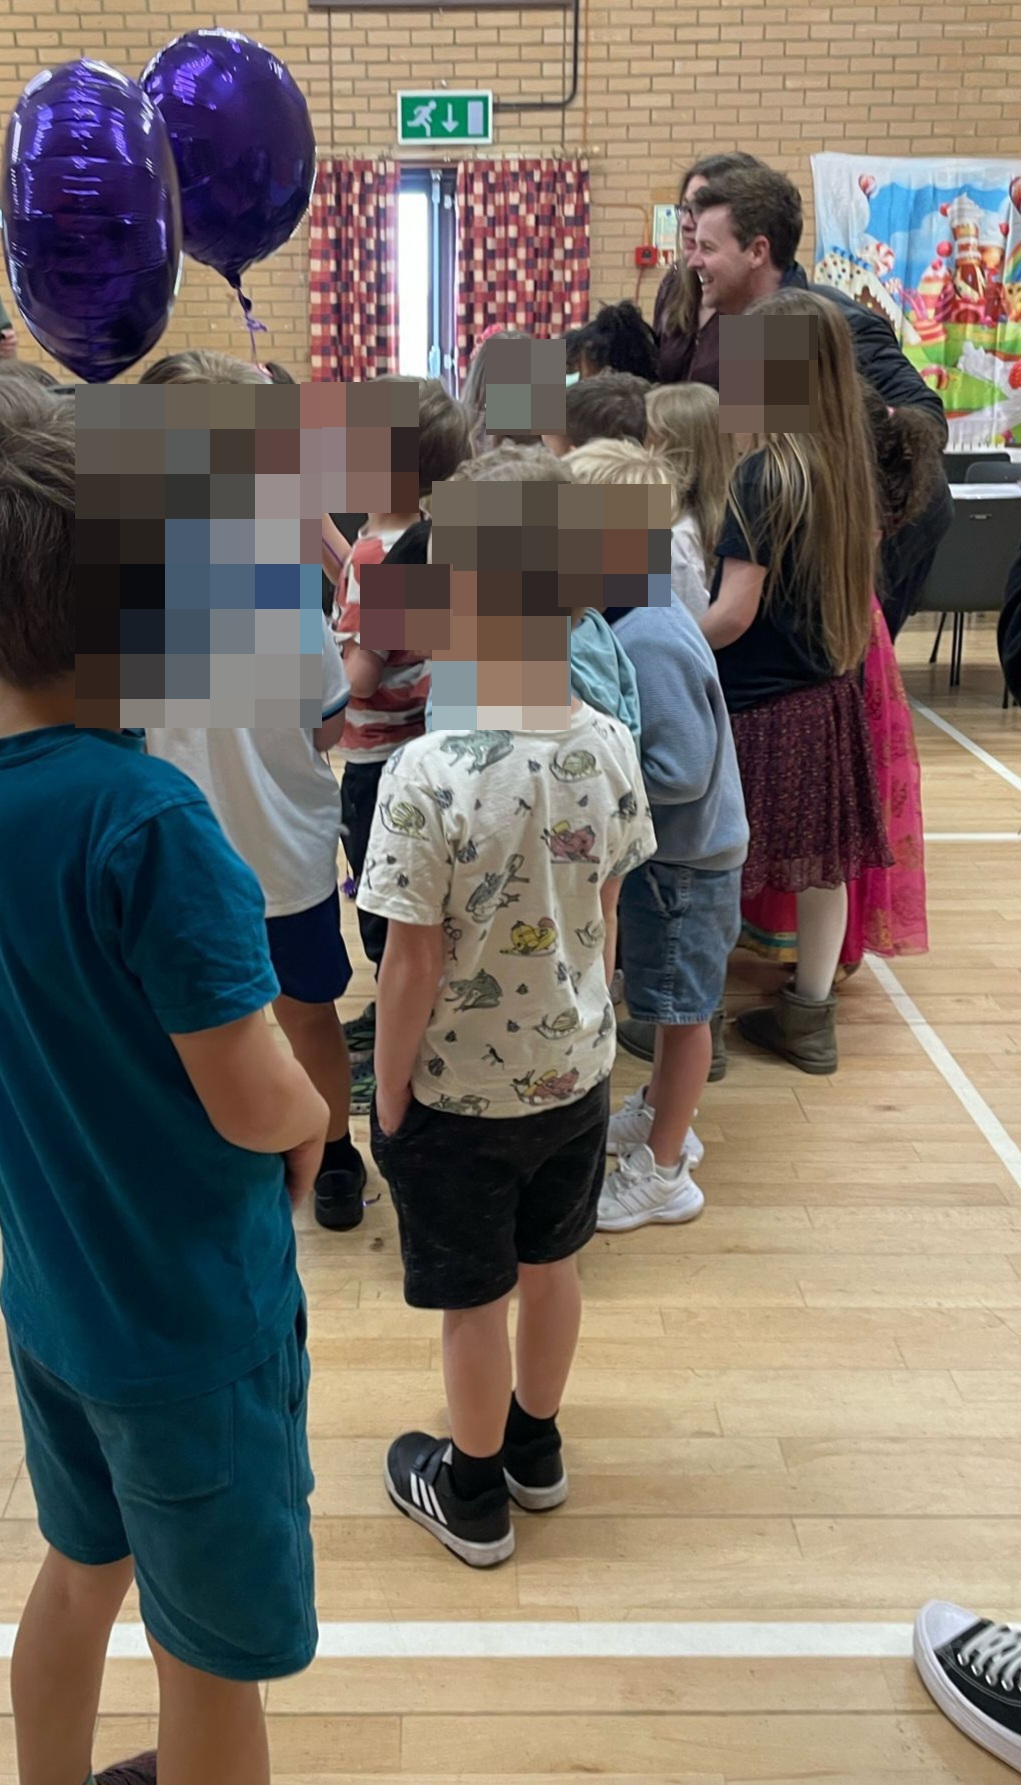 TV Star Dec Spotted at 6-Year-Old's Party - Kids Clueless About His Fame